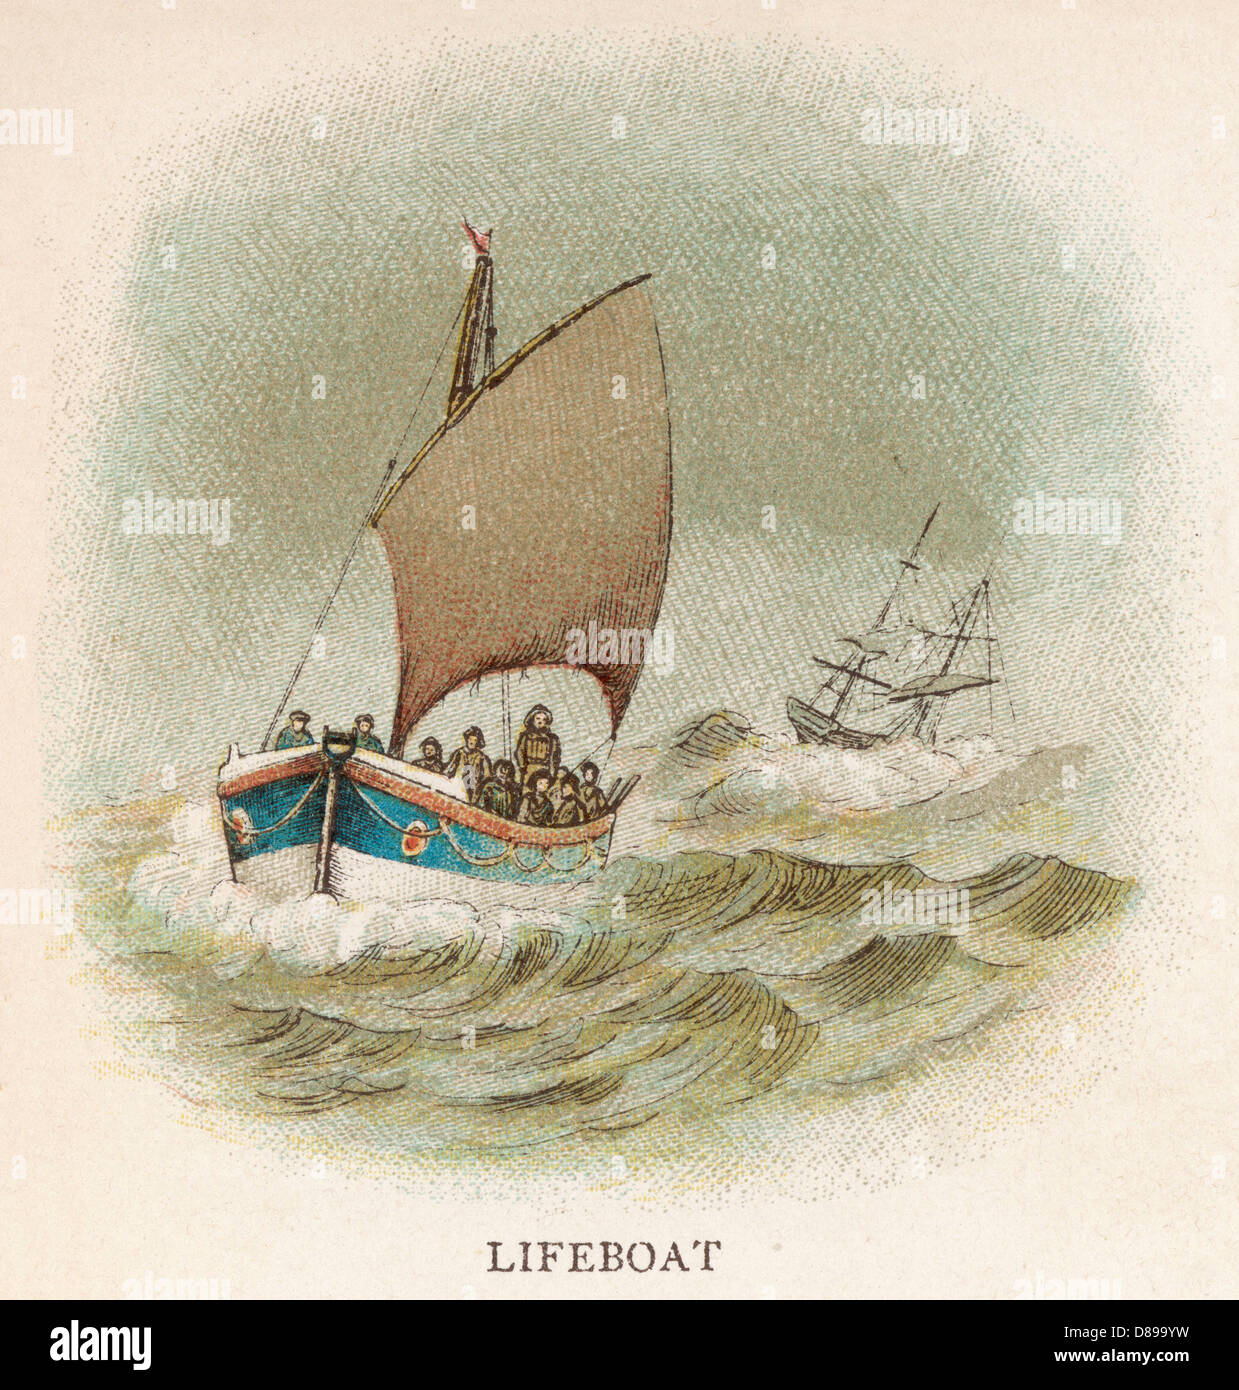 British Lifeboat - vers 1880 Banque D'Images